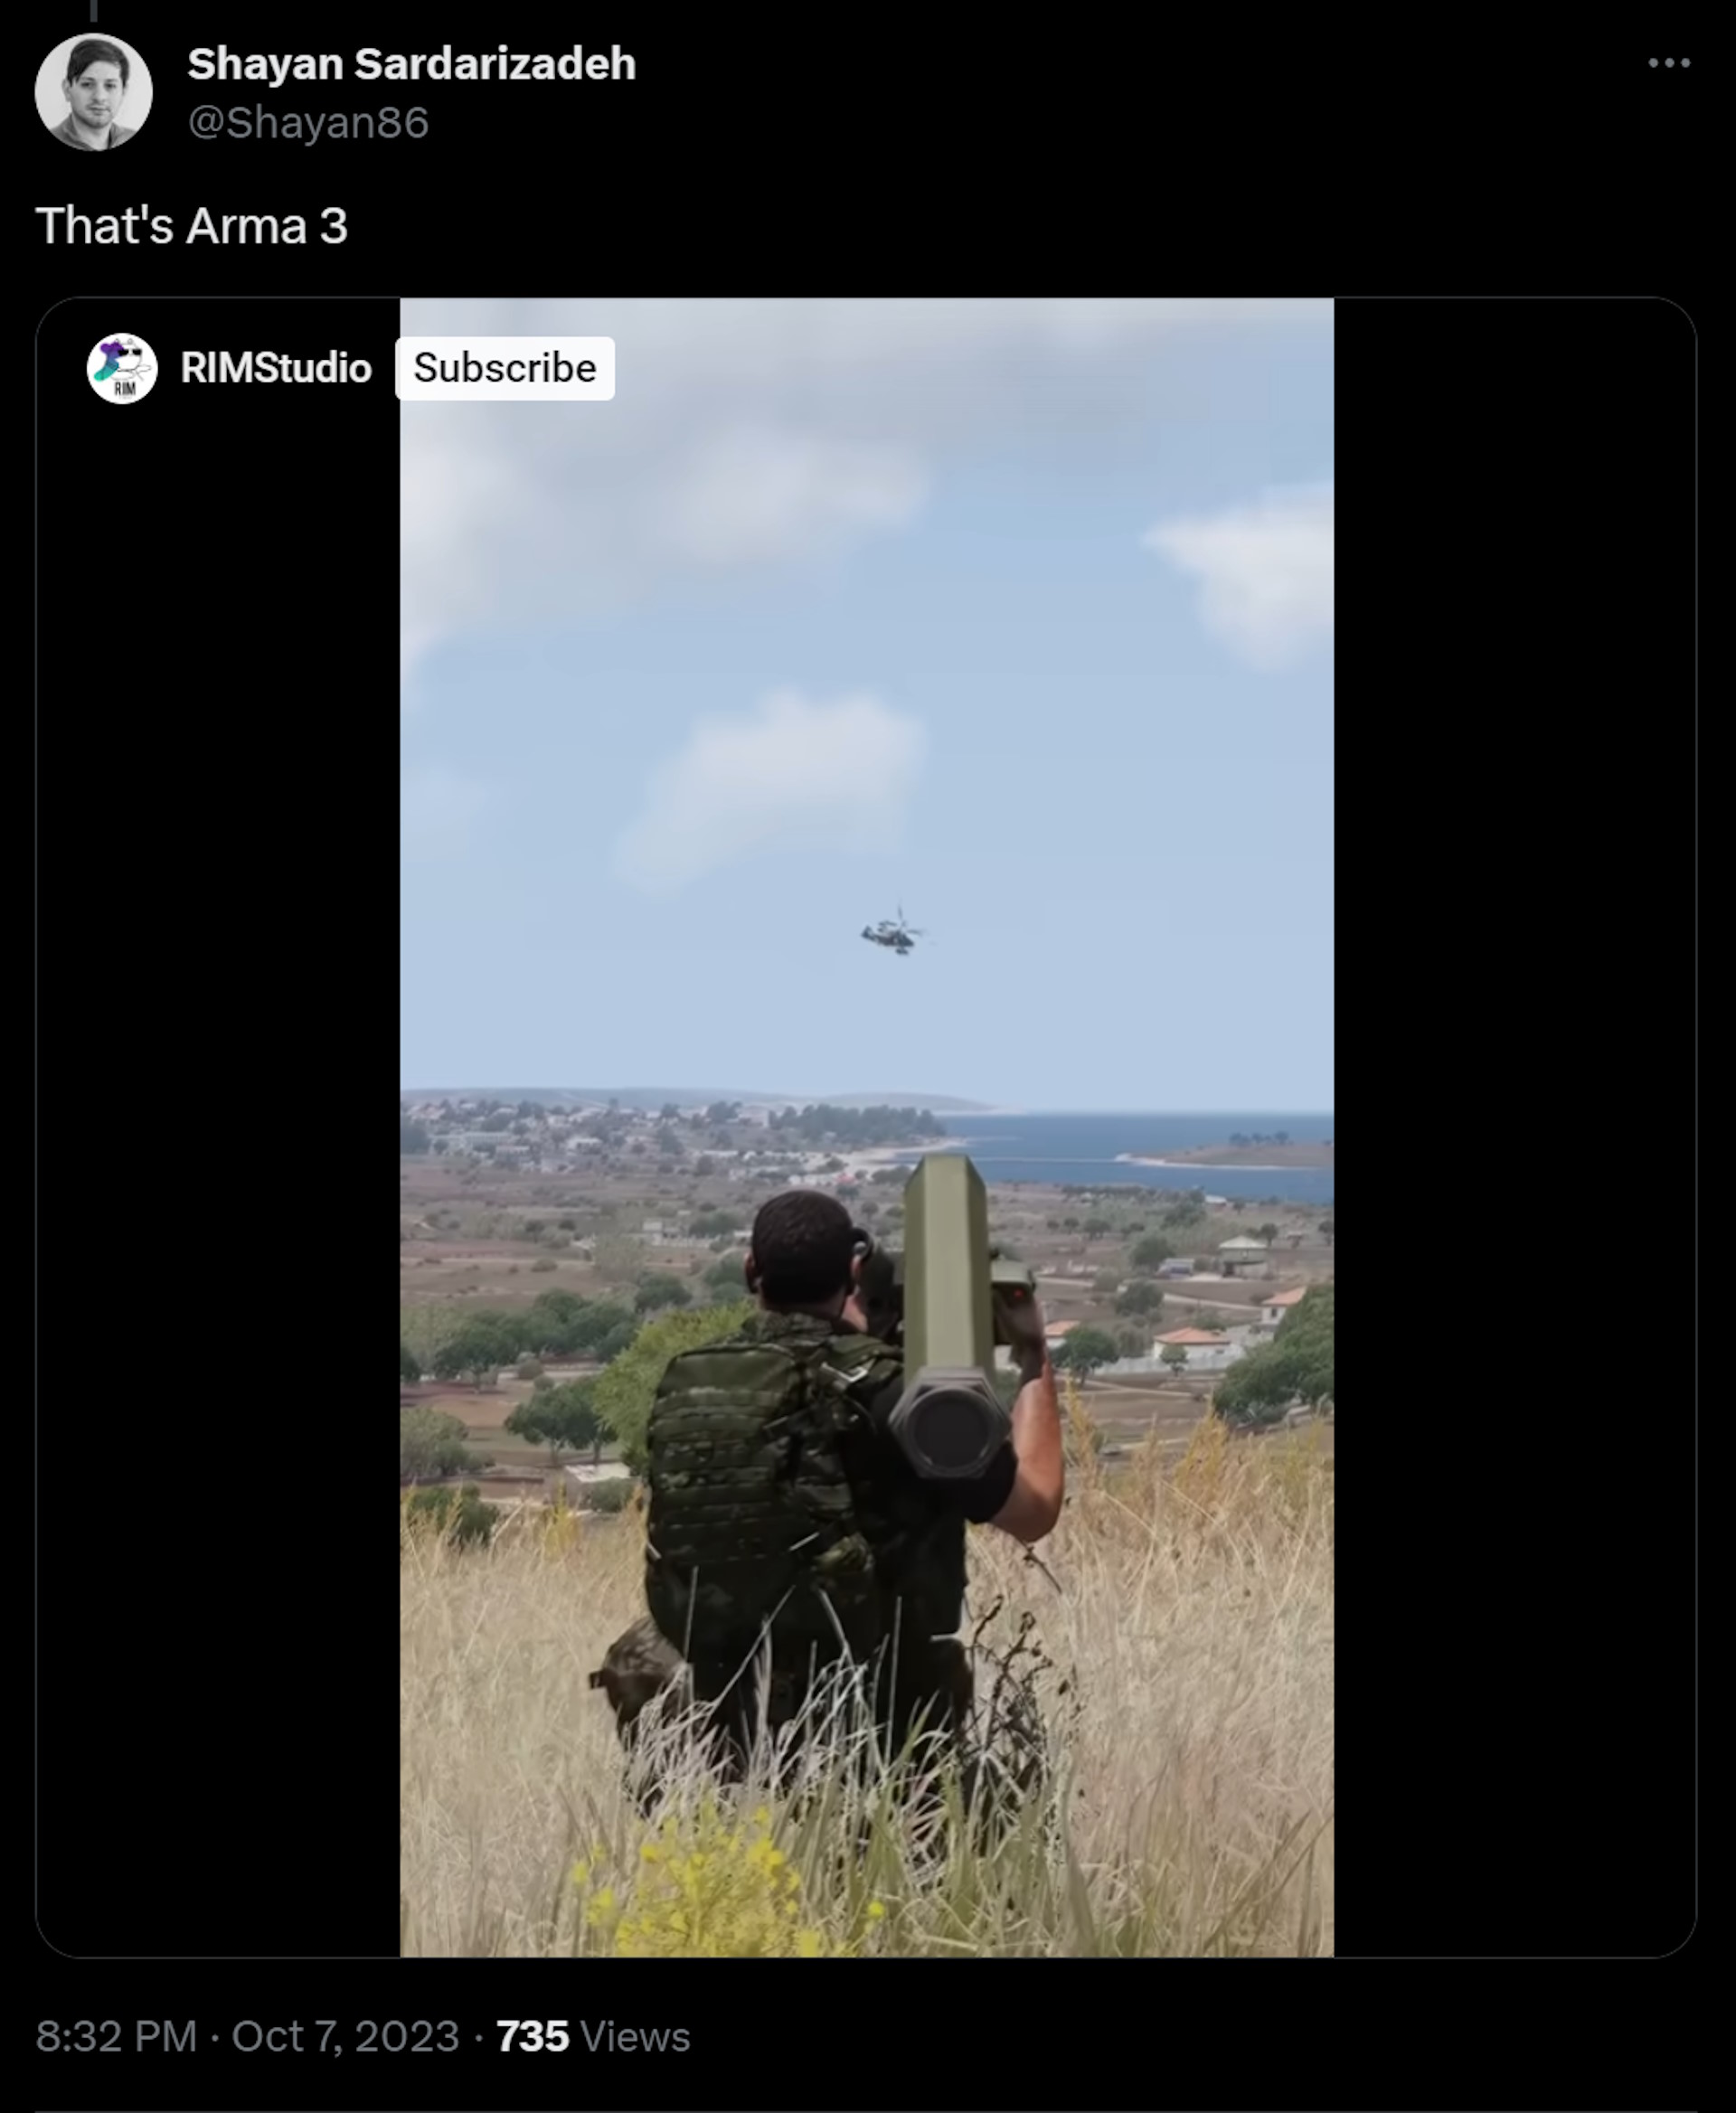 That's Arma 3